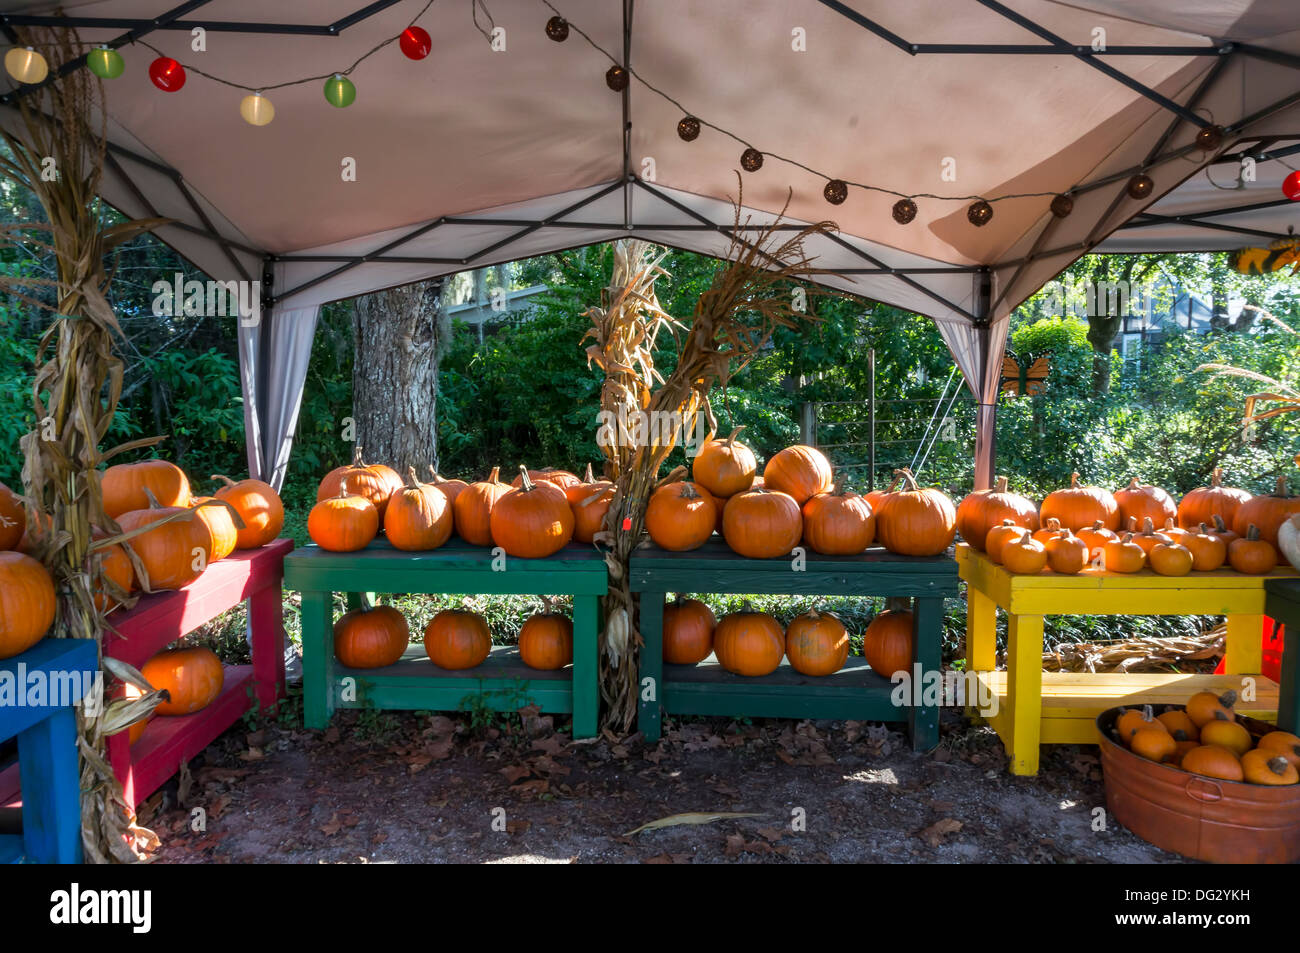 Halloween and Thanksgiving orange pumpkins [Cucurbita pepo] for sale in a roadside vegetable stand tent. Stock Photo